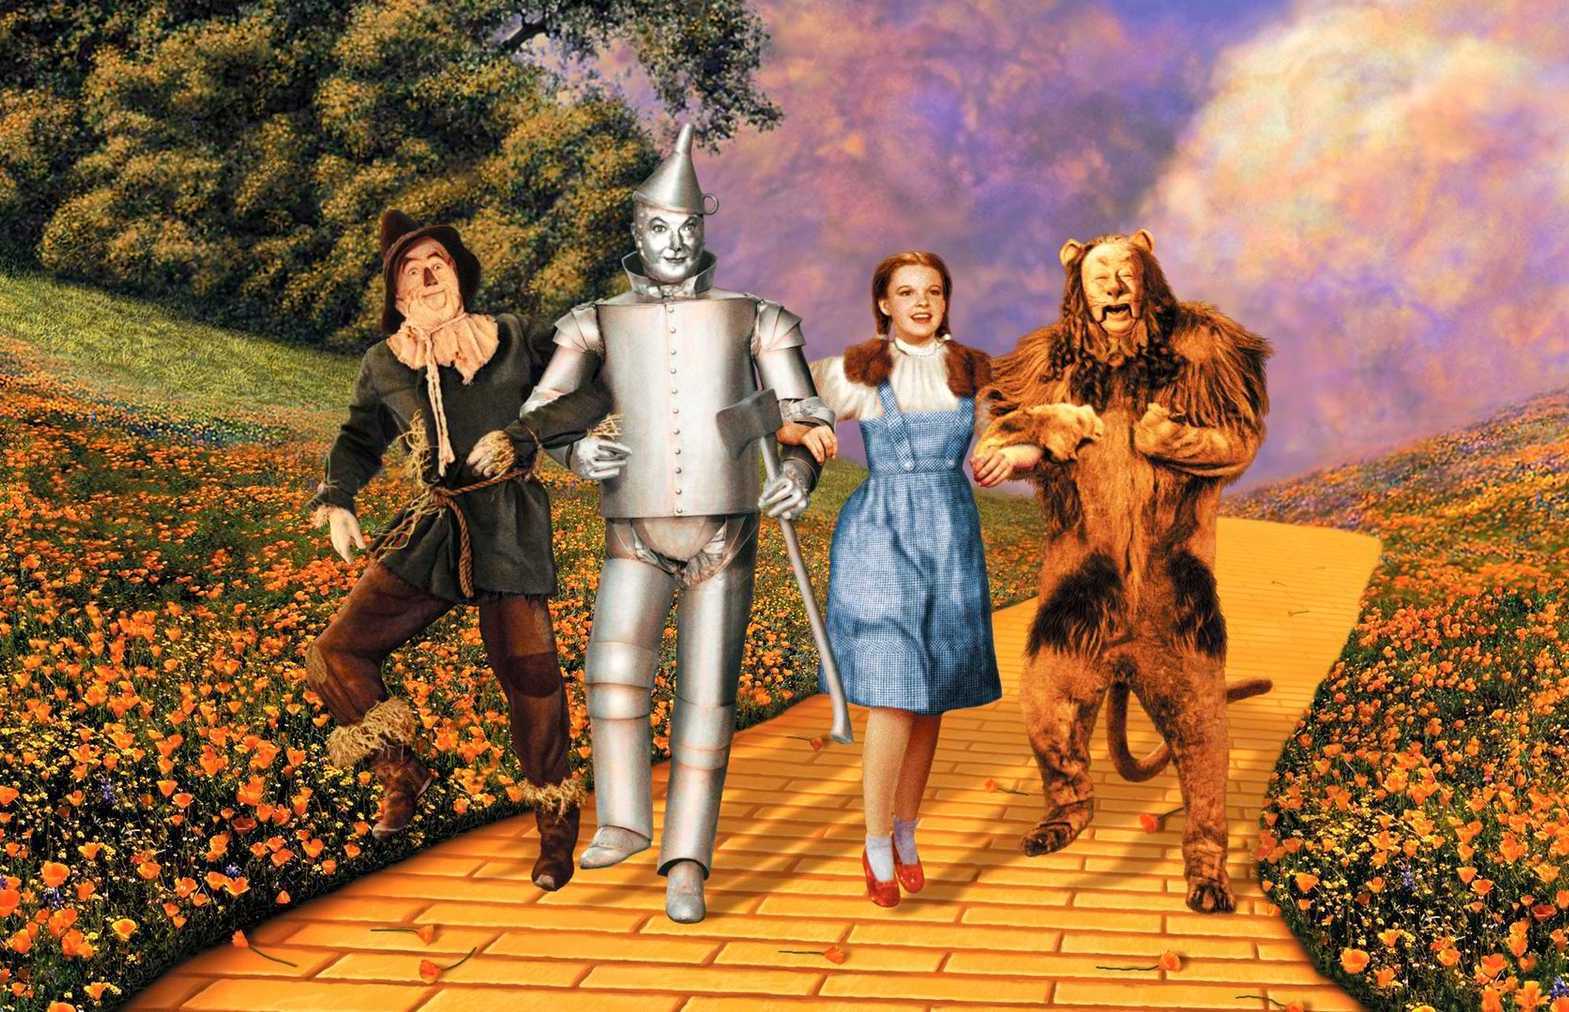 <p>Created by American writer L. Frank Baum, the Land of Oz is a fictional country made famous in a collection of literary works, including the novel <em>The Wonderful Wizard of Oz </em>and its numerous <a href="https://www.imdb.com/title/tt0032138/">film adaptations</a> produced throughout the 20<sup>th</sup> century. Dorothy Gale and her house travel to Oz after being swept up in a tornado. The Land of Oz, along with its witches, wizards, fairies, and other residents, have stirred hearts for over 100 years.</p>